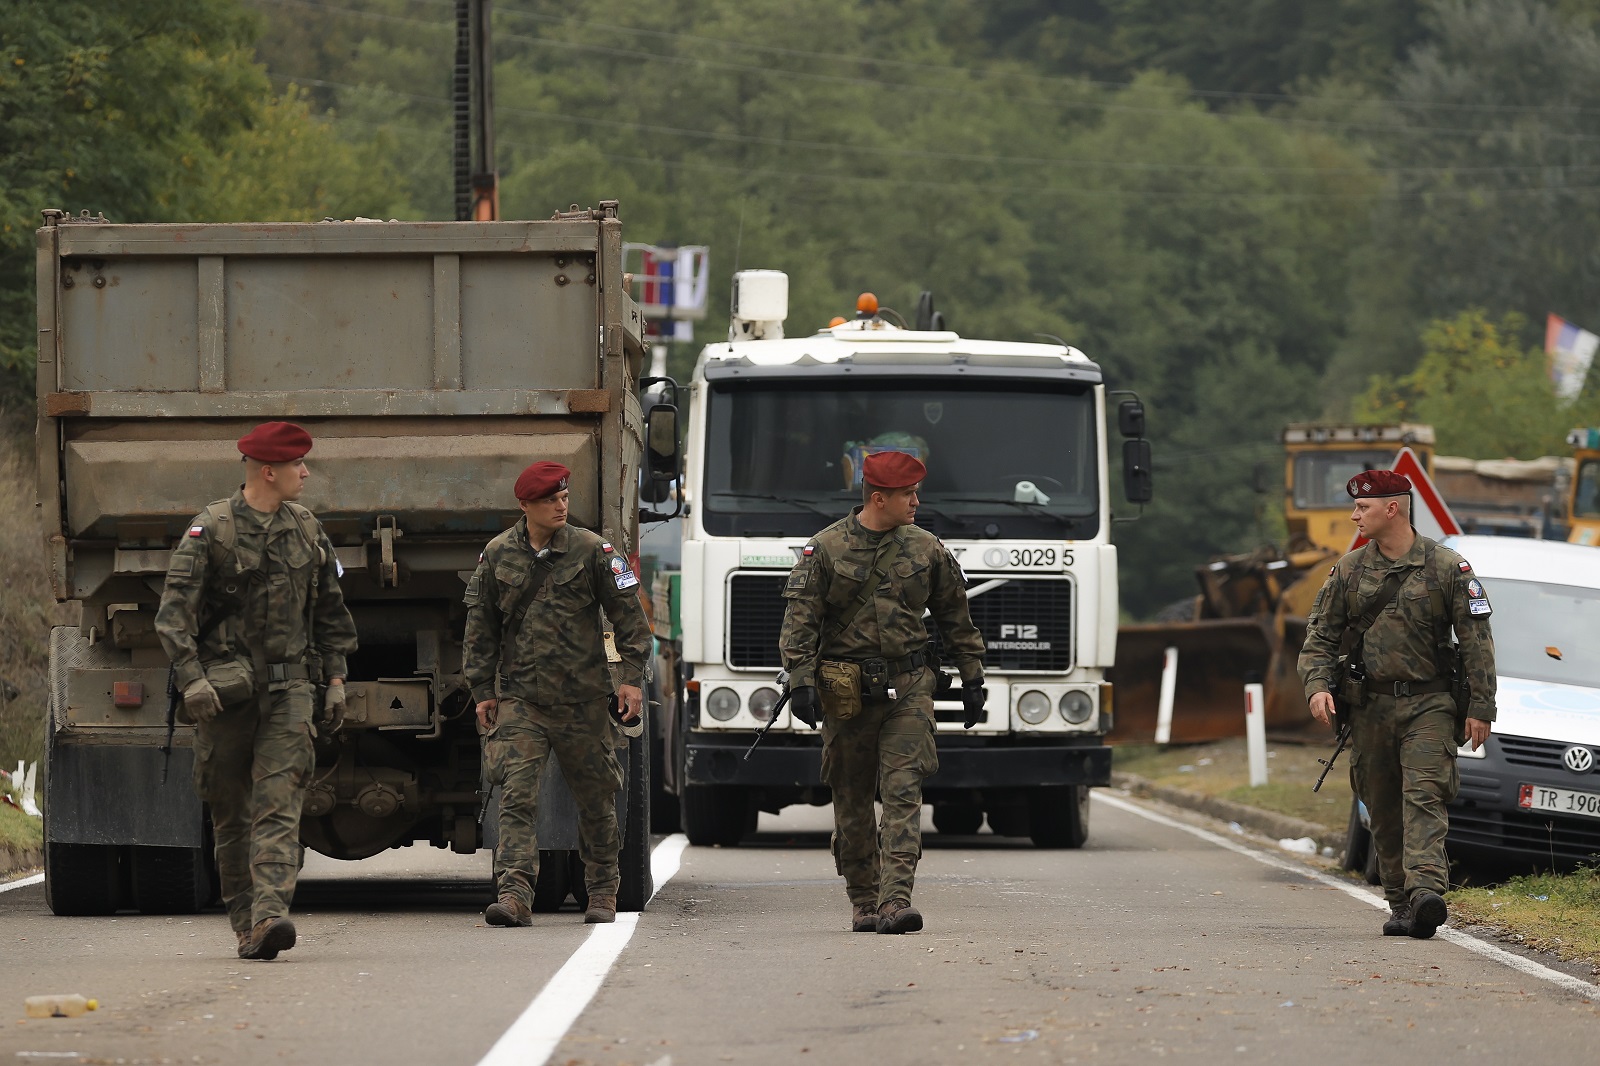 epa09492596 NATO peacekeepers patrol the area near the border crossing between Kosovo and Serbia in Jarinje, Kosovo, 28 September 2021. Kosovo Serbs in the northern part of the ethnically divided town of Mitrovica set up road barricades with trucks and cars to protest against the Kosovo government’s entry ban on vehicles with Serbian registration plates.  EPA/VALDRIN XHEMAJ